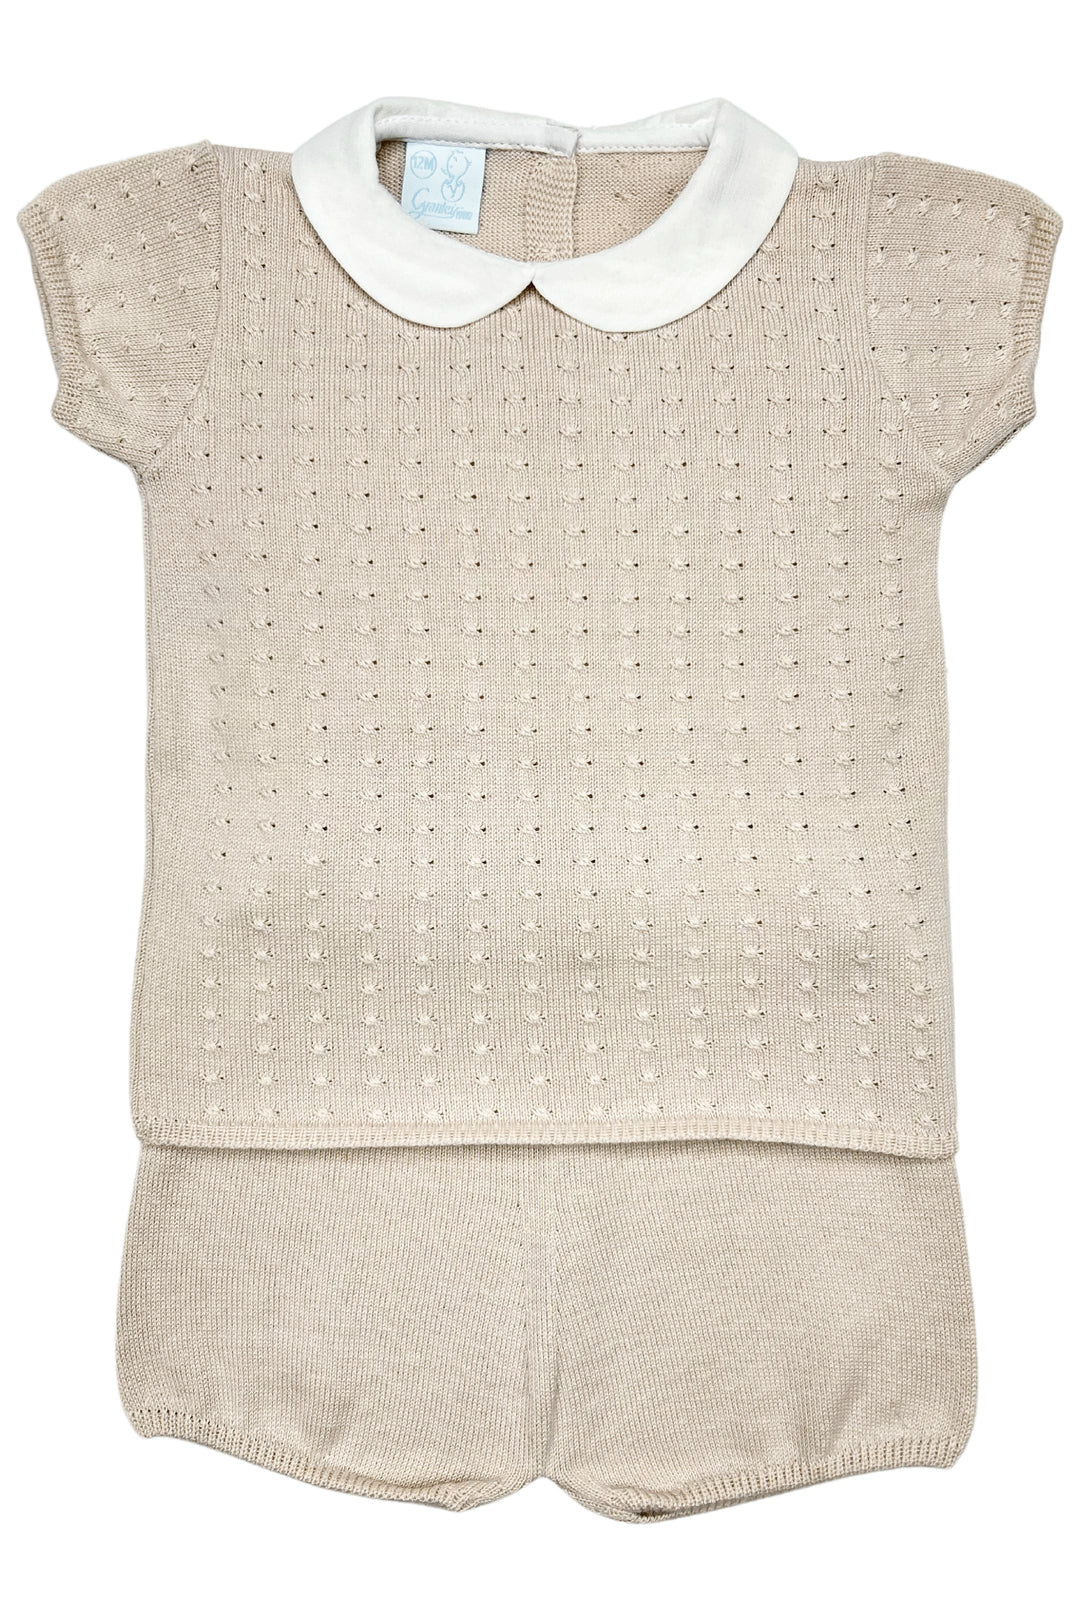 Granlei "Harry" Stone Knit Top & Shorts | Millie and John